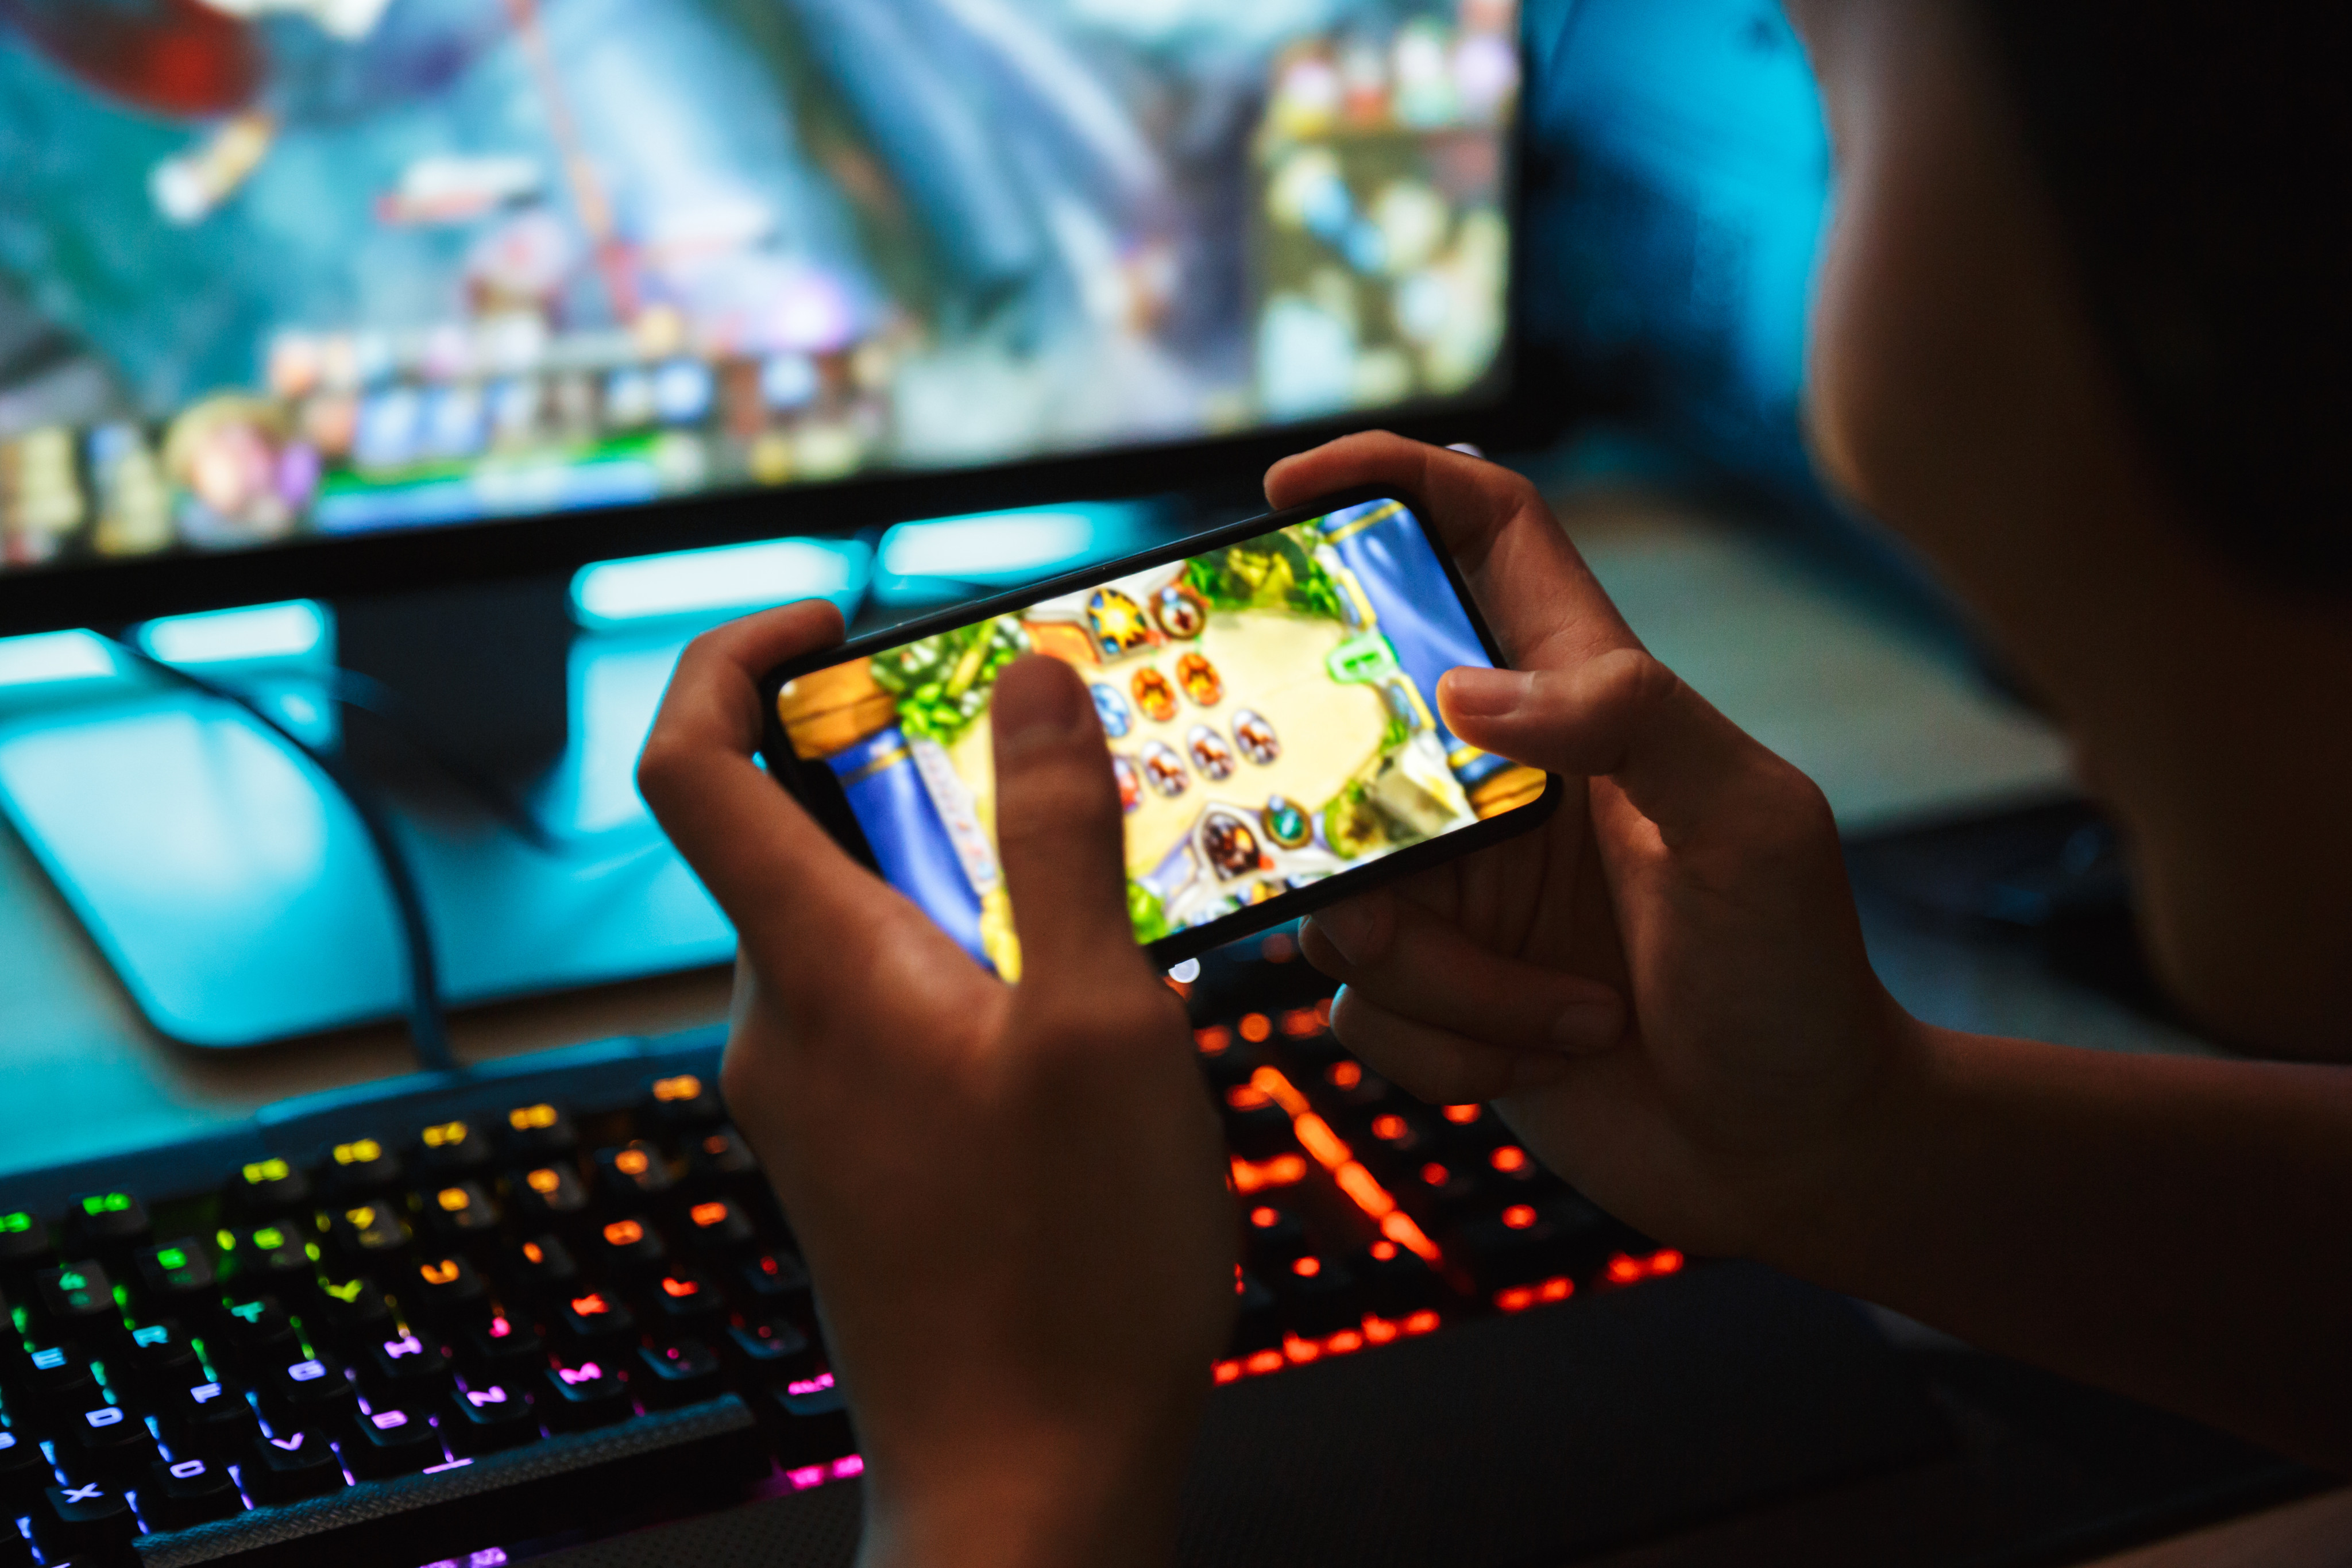 Alibaba Group Holding continues to adjust or divest its interests in certain non-core businesses, including video gaming. Photo: Shutterstock